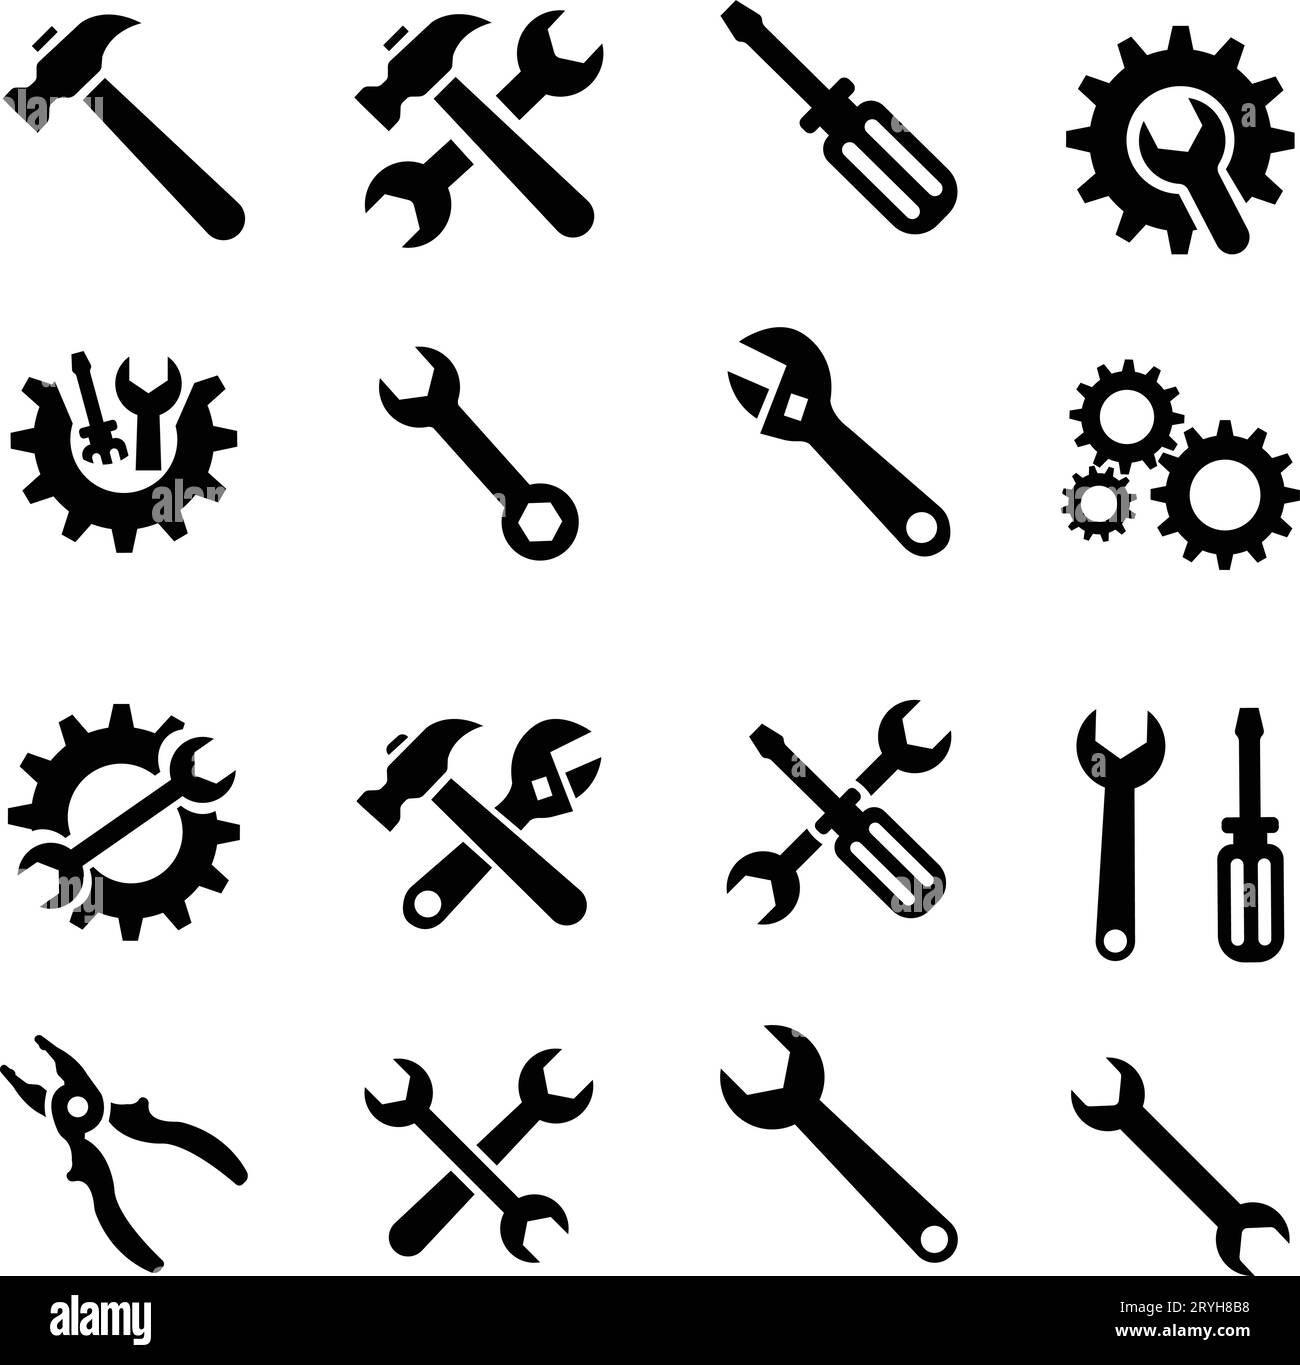 Tools and Service flat icons set. Wrench, screwdriver and gear icon. Screwdriver and wrench glyph icon. Settings and repair, service sign Stock Vector